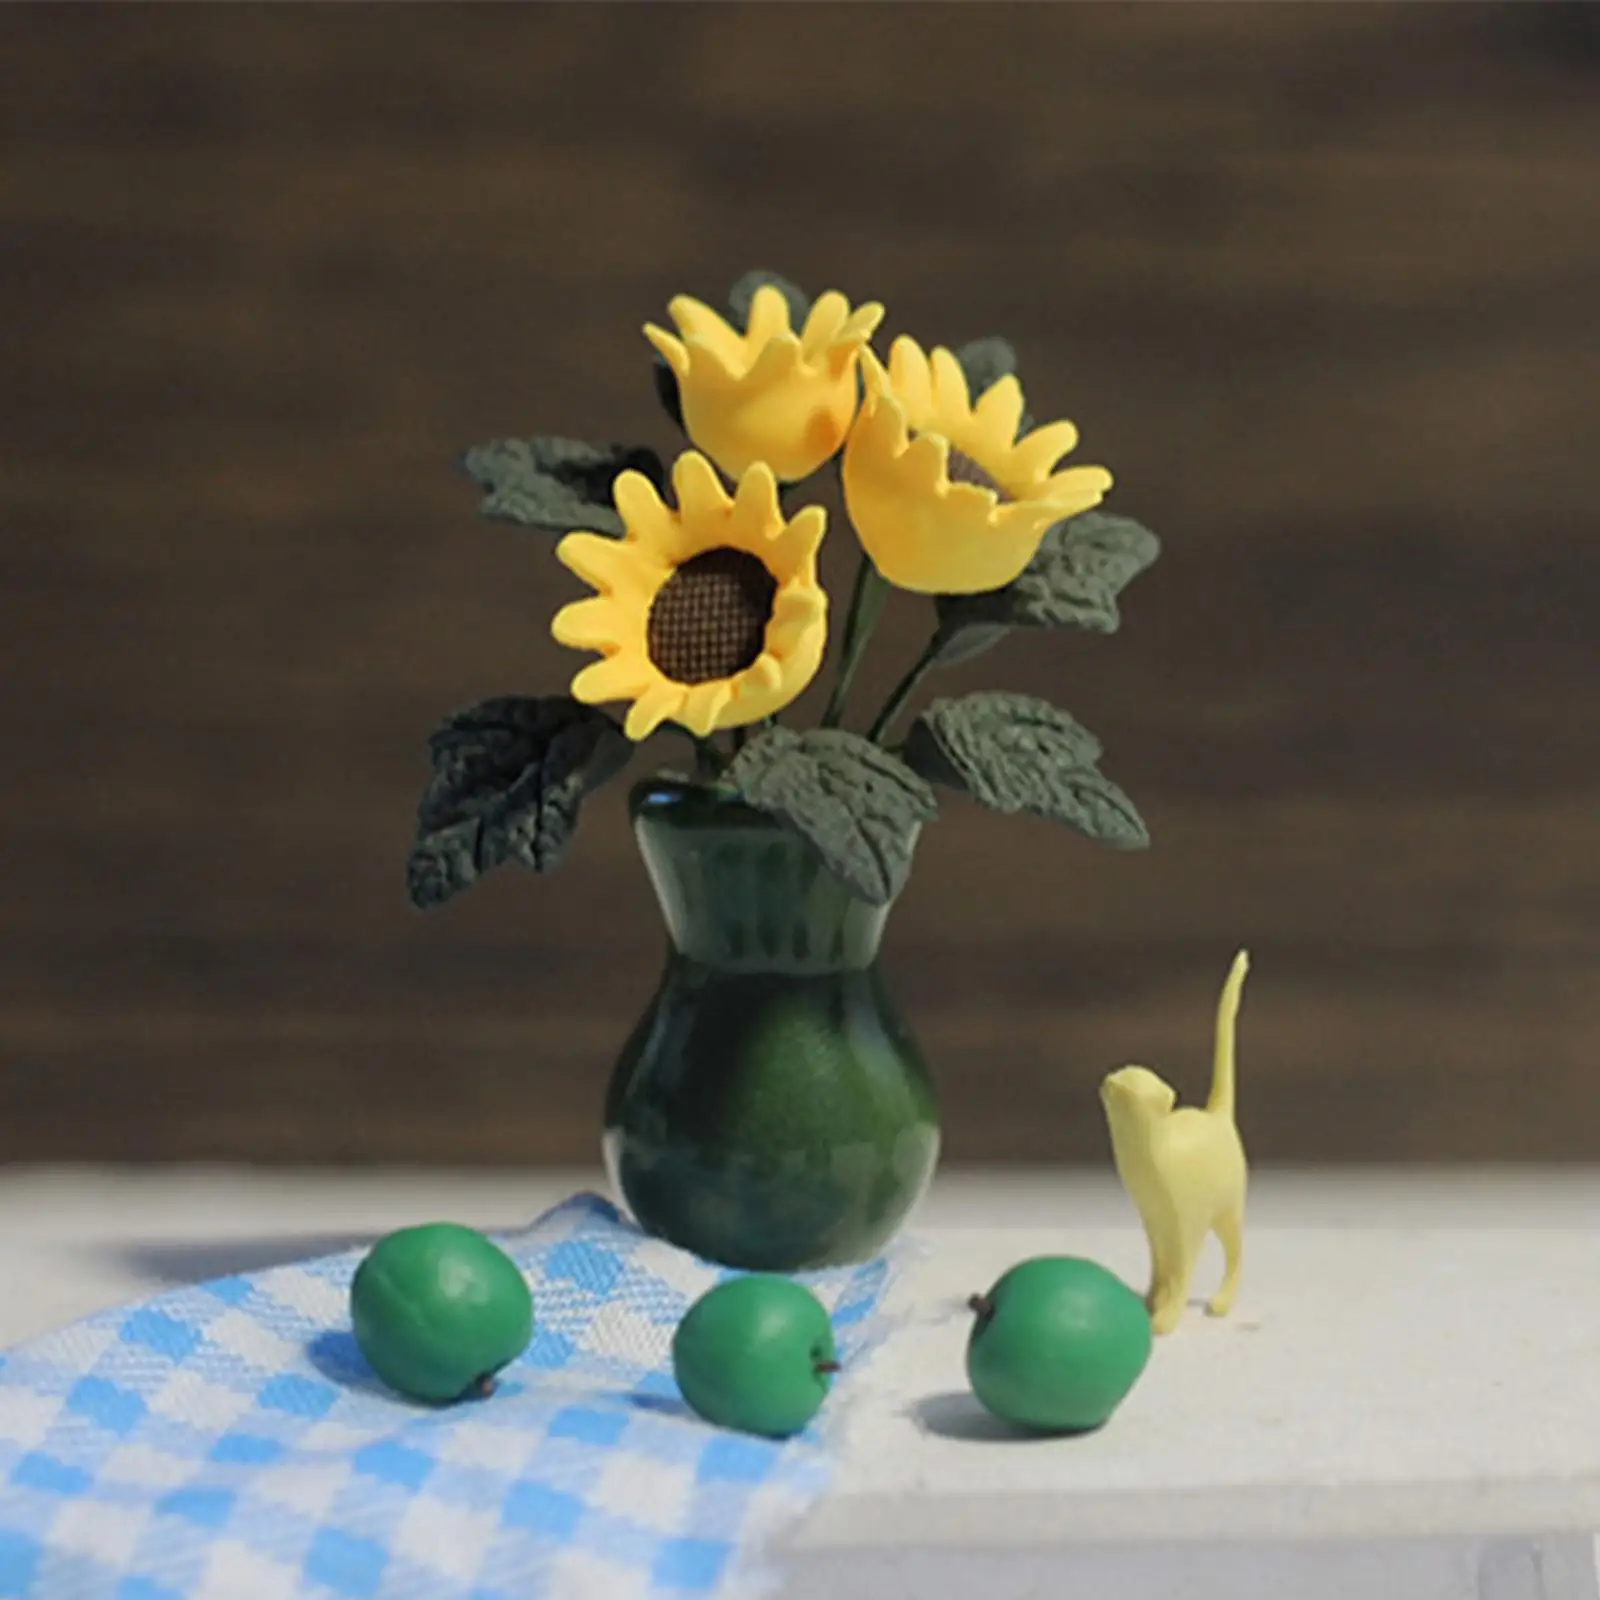 1/12 Dollhouse Sunflowes Pretend Play Tiny Bonsai Model Dollhouse Potted Flowers for Dollhouse Accessories Ornaments Gift